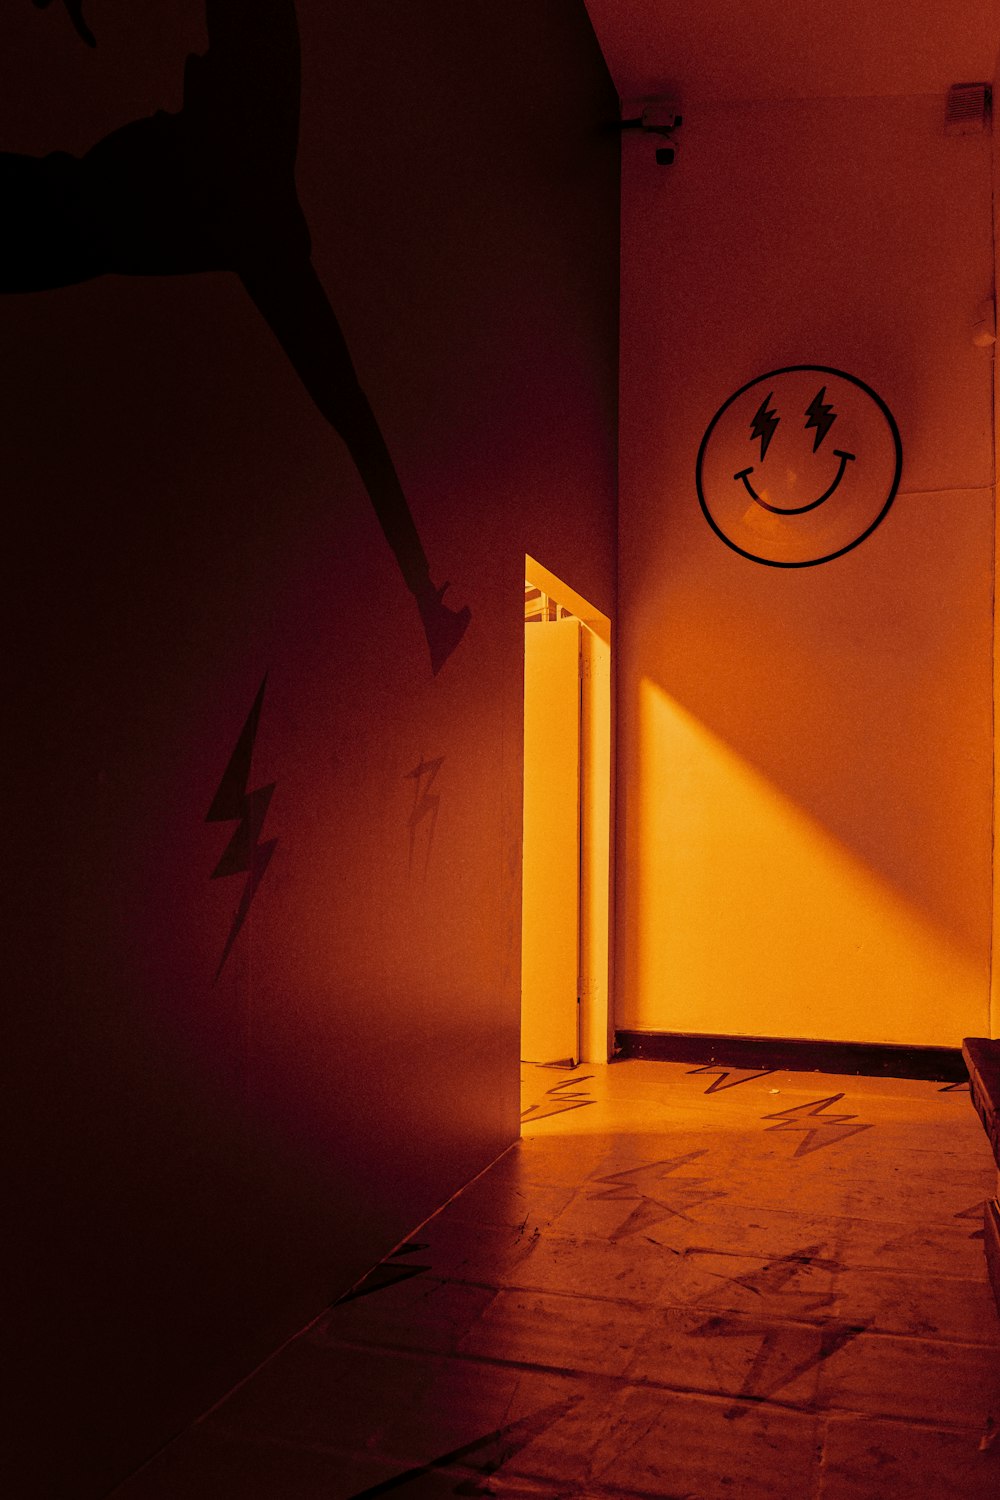 a hallway with a smiley face painted on the wall